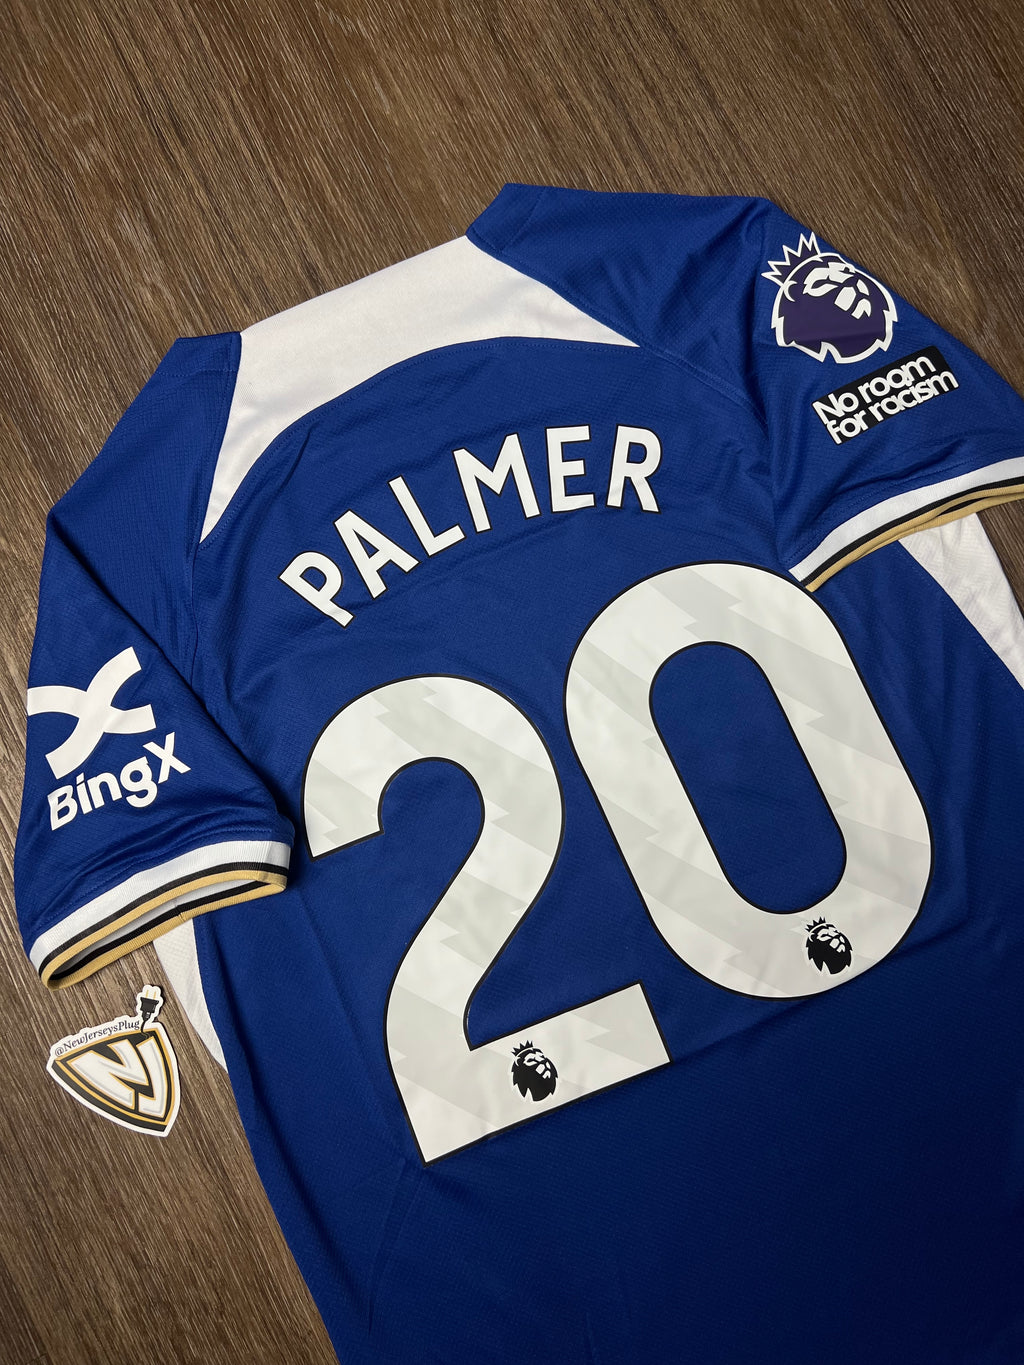 Chelsea Cole Palmer Home Jersey